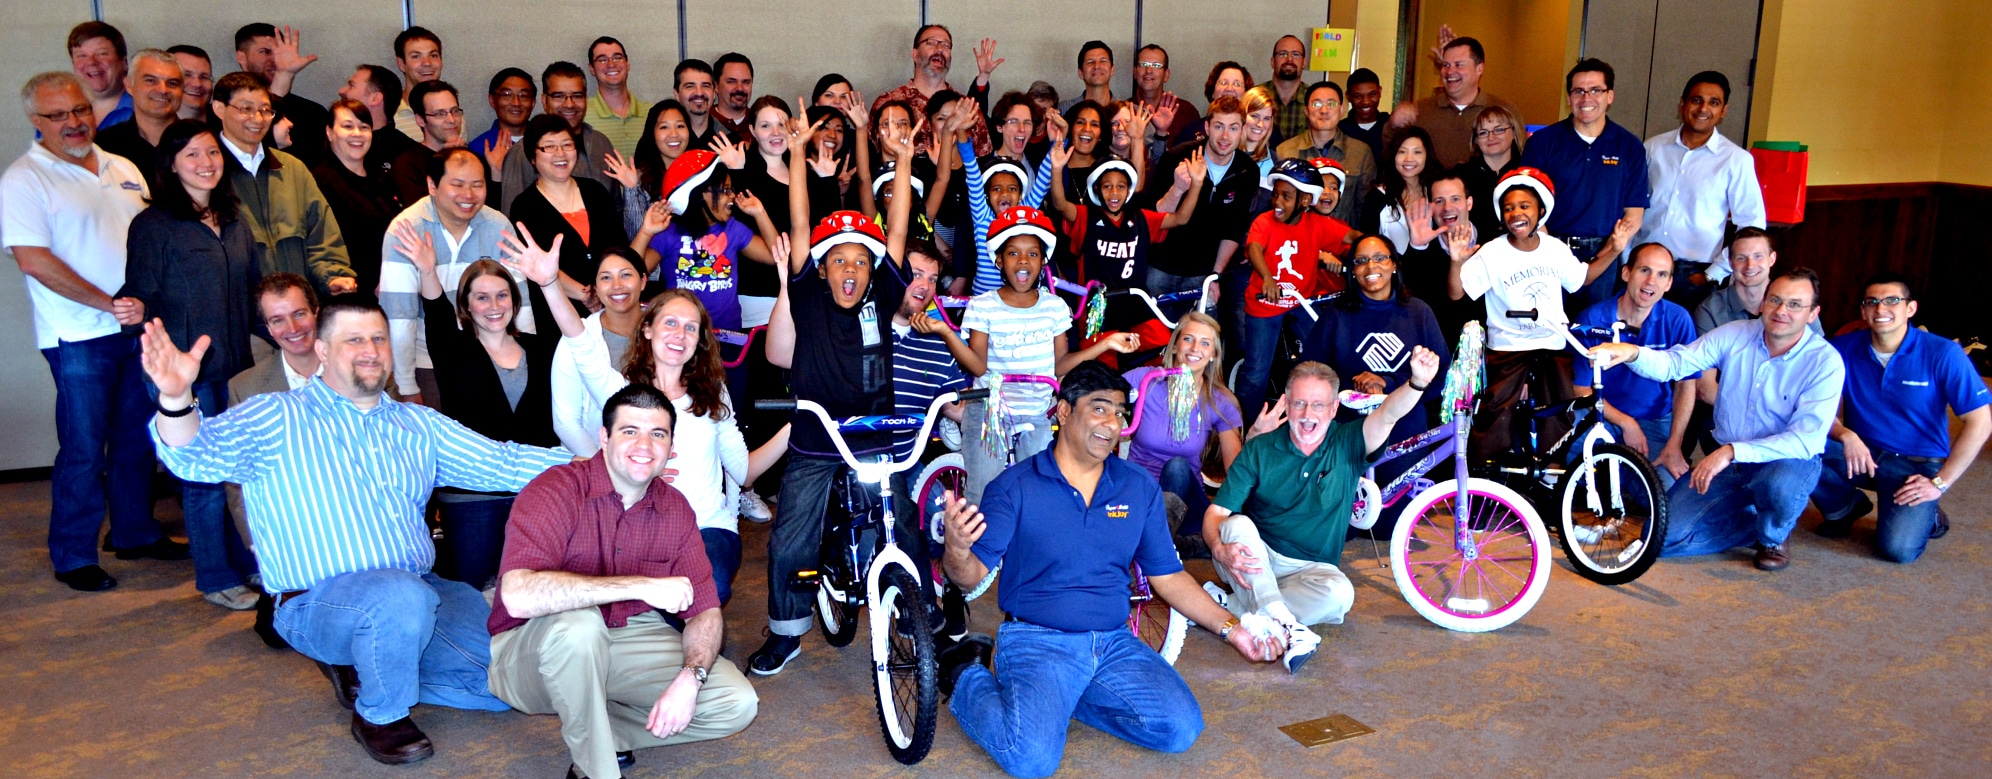 Newell Rubbermaid Build-A-Bike Event in Chicago